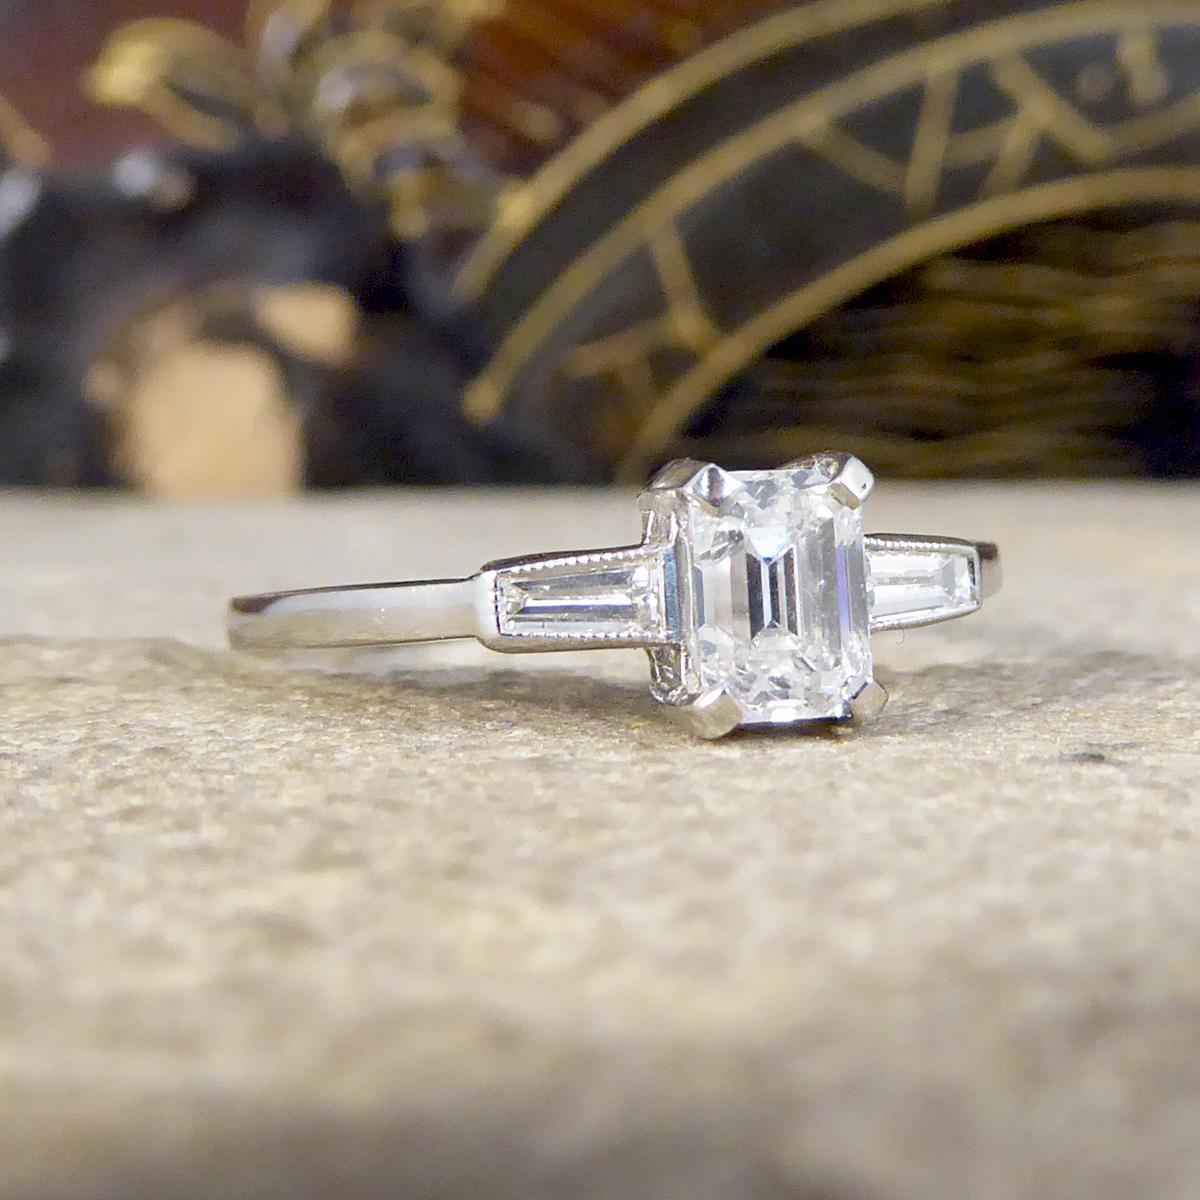 The perfect contemporary engagement ring has such a lustrous sparkle holding a very bright and clear Emerald Cut Diamond centre. It weighs 0.52ct in the centre with Tapered Baguette Cut Shoulders either side. Showing great colour and clarity it